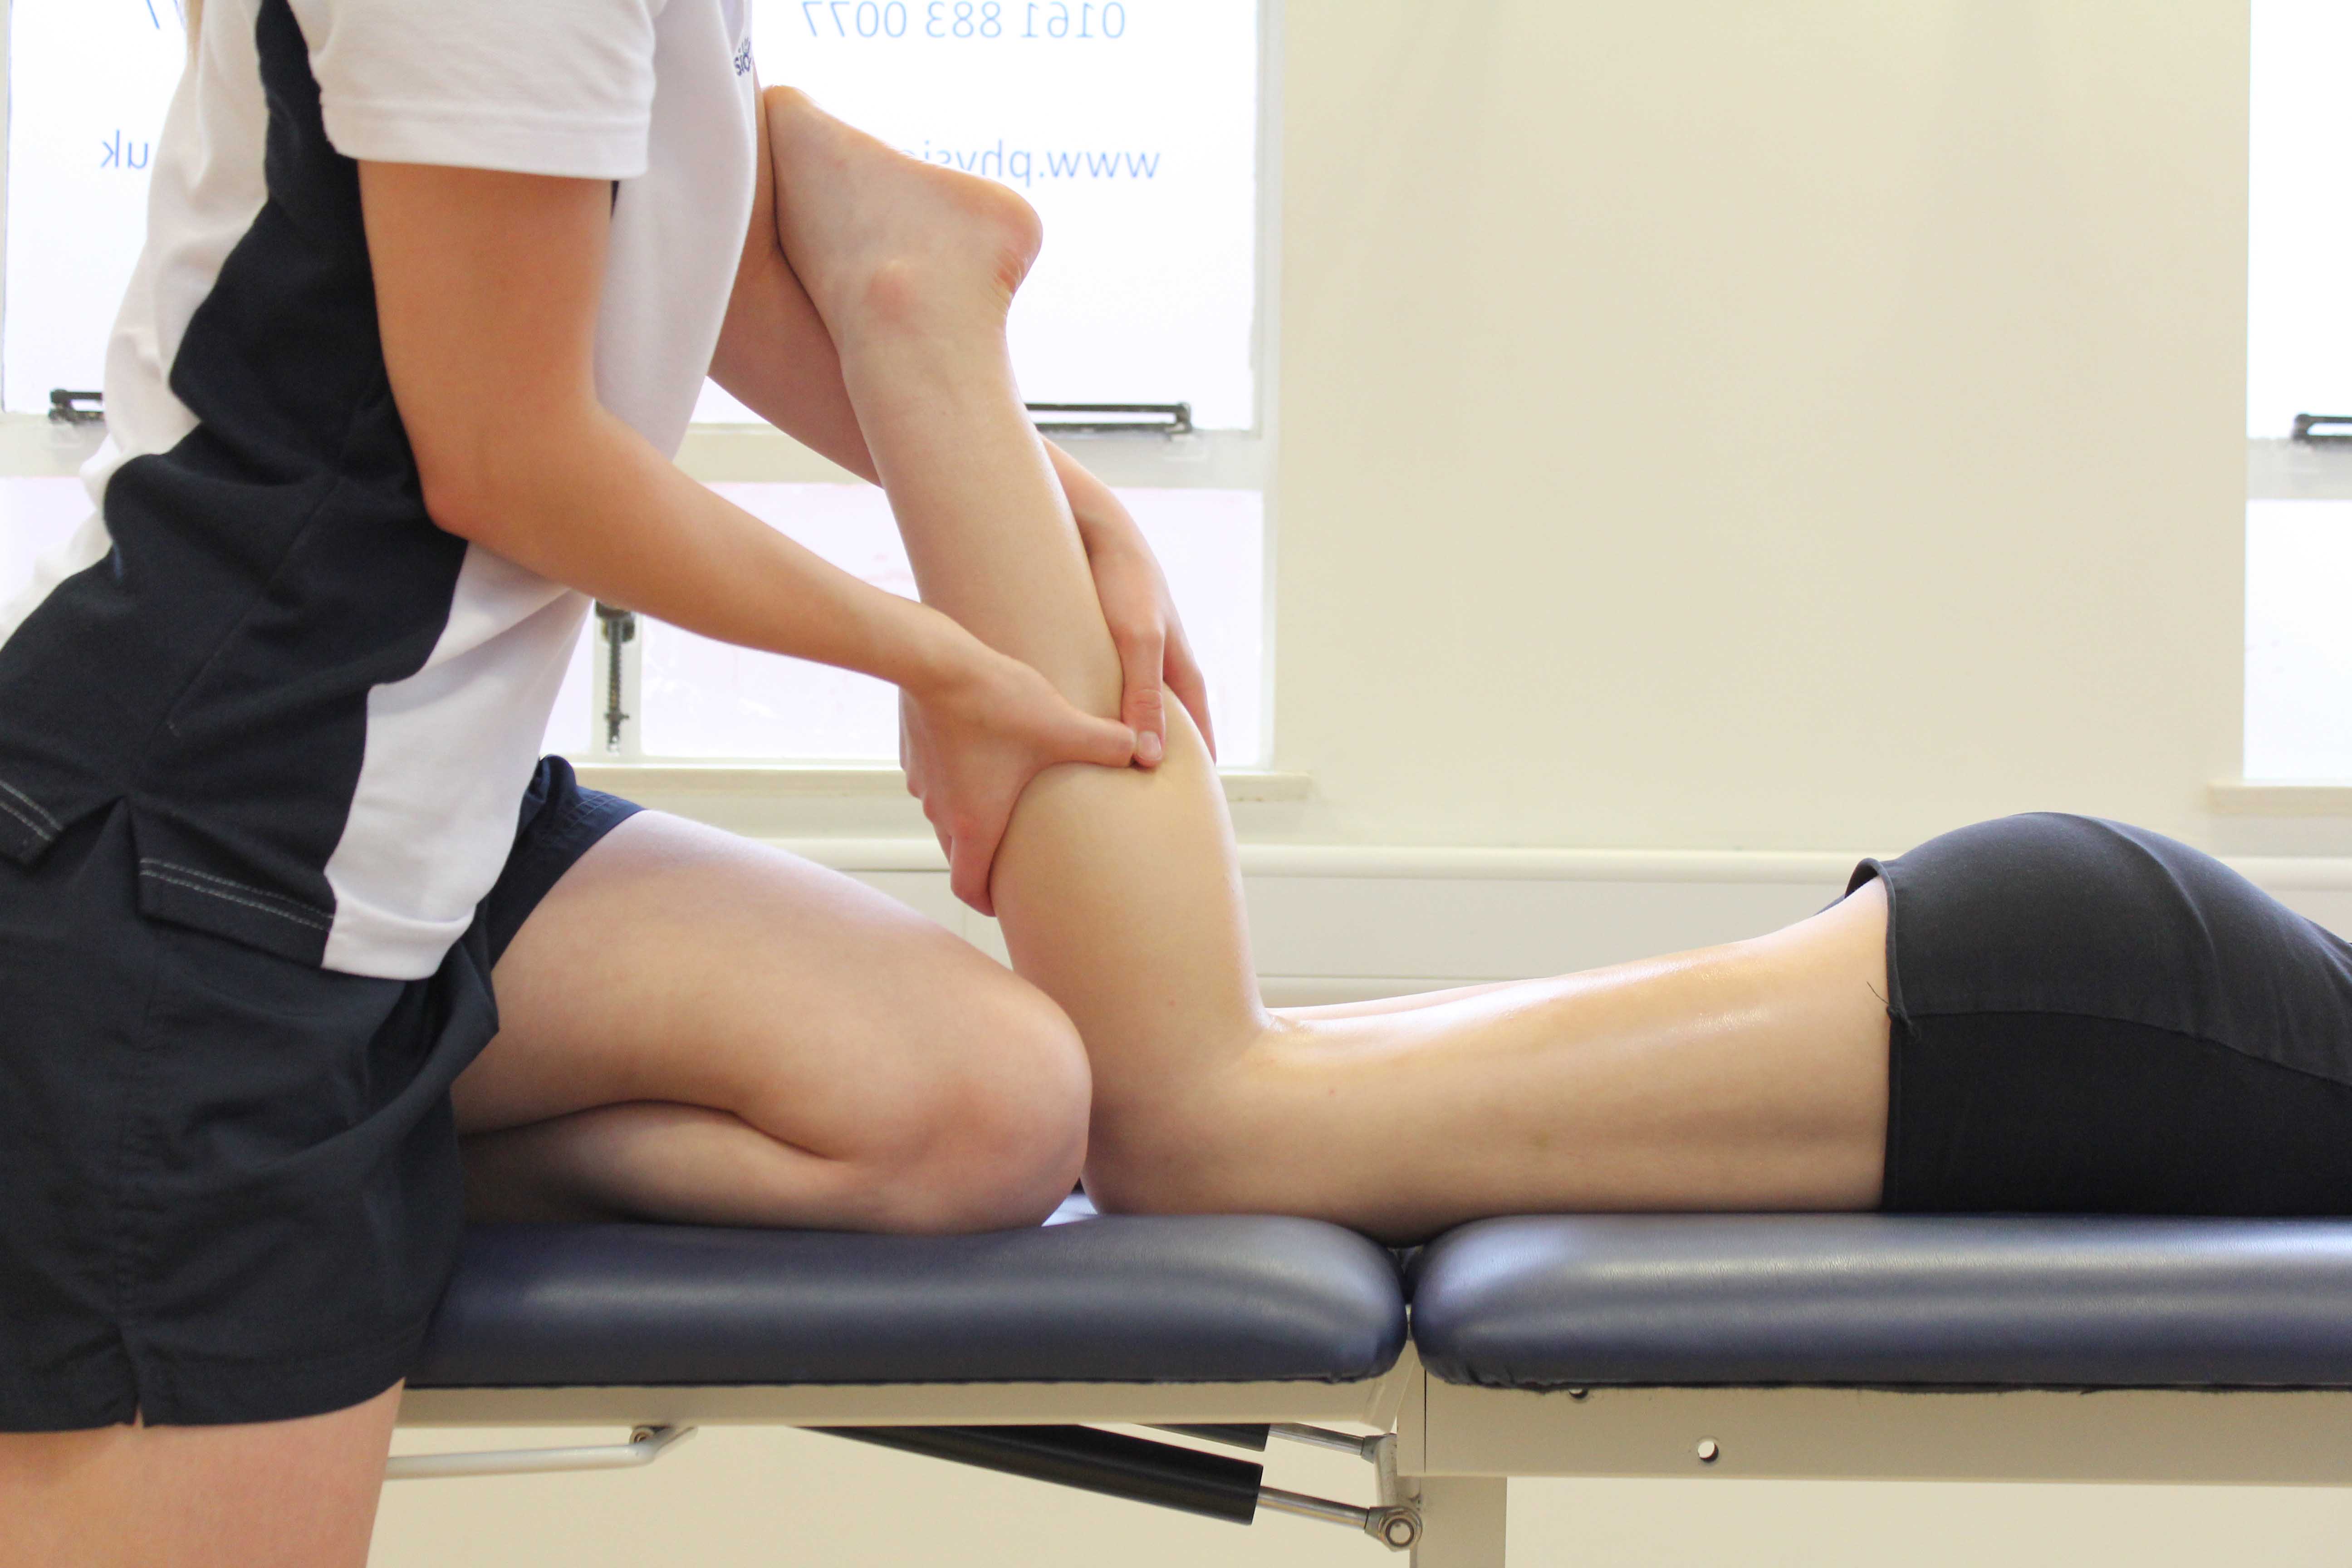 Tennis leg (calf muscle tear) - Ultrasound Guided Injections